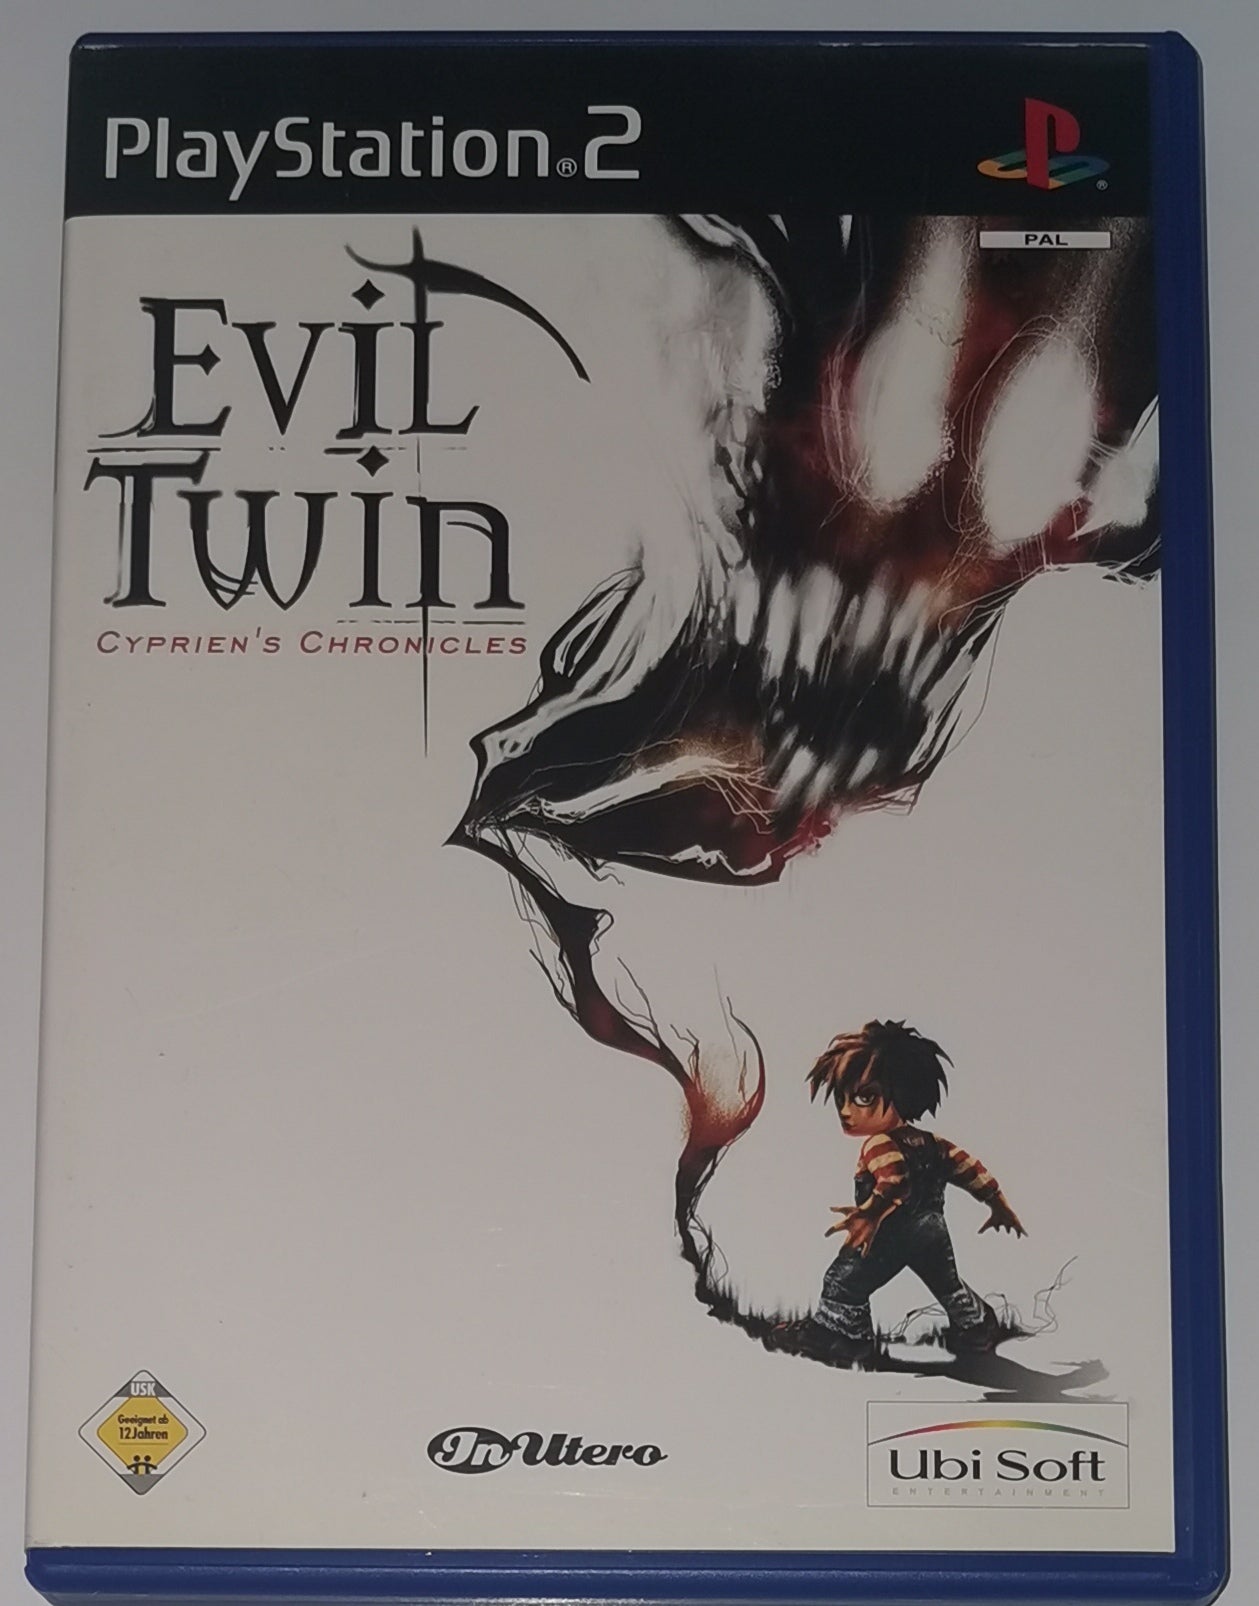 Evil Twin Cypriens Chronicles (Playstation 2) [Gut]